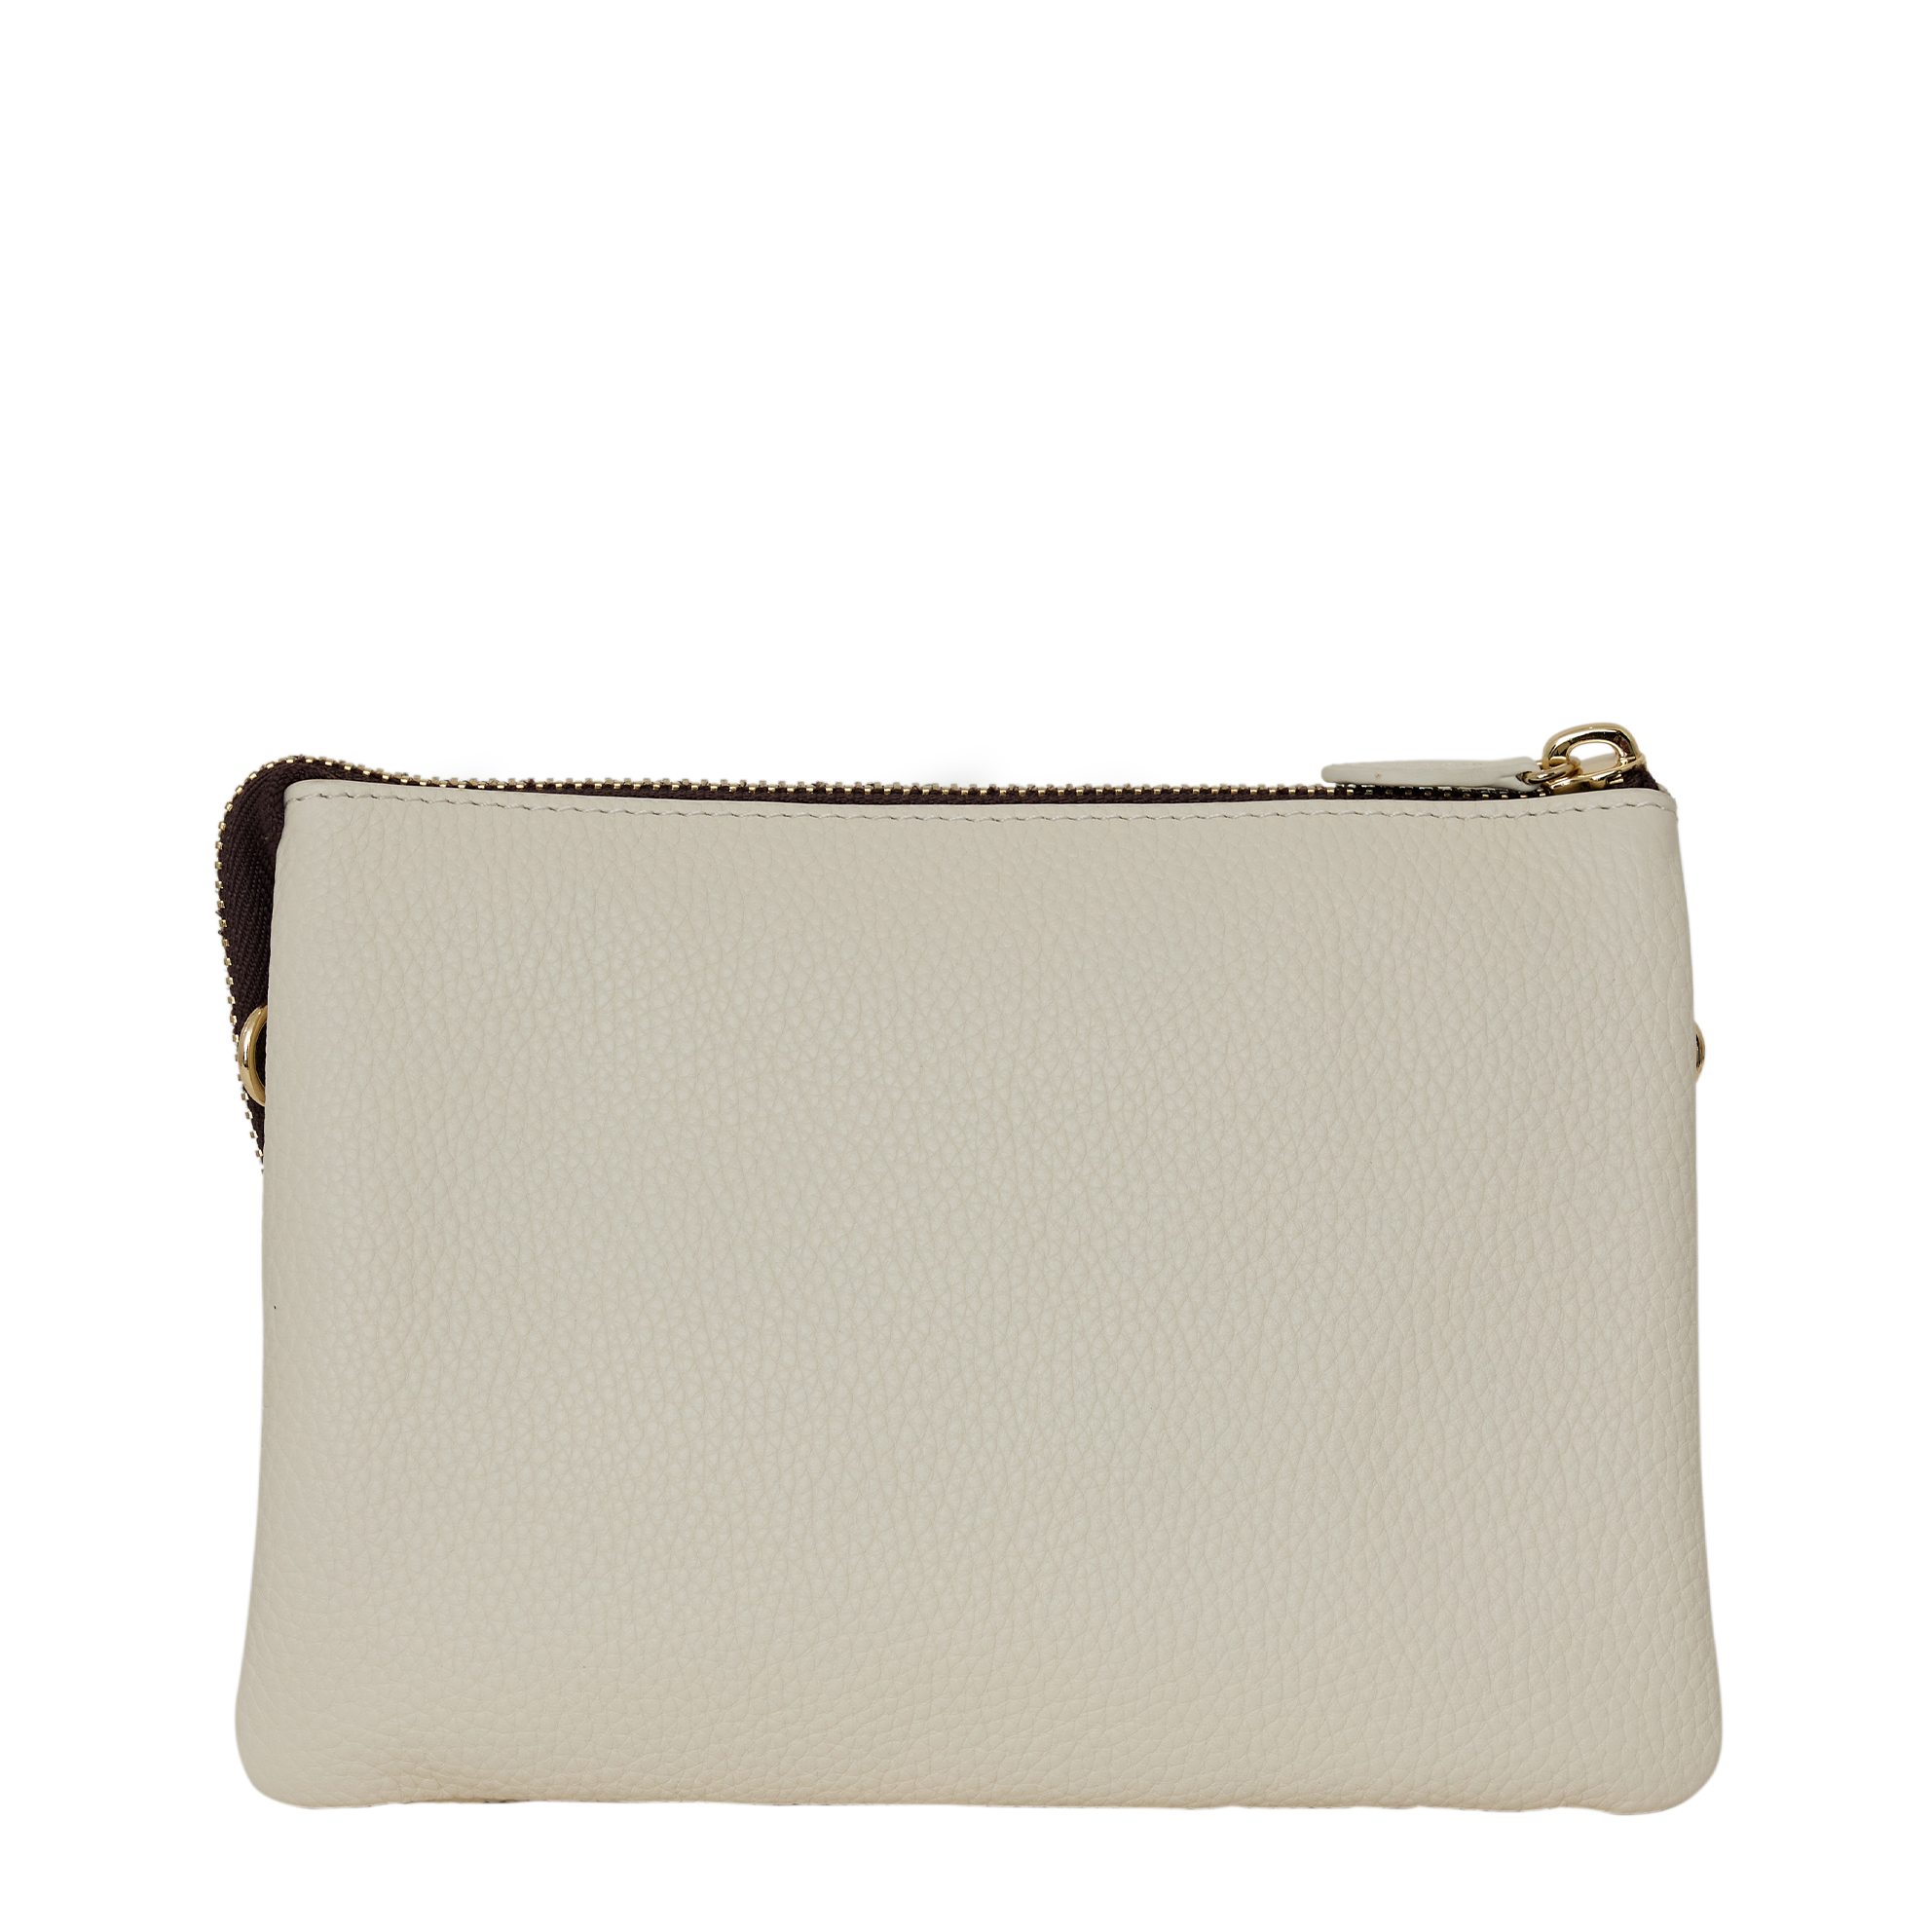 Saben Tilly's Big Sis Crossbody Vintage White - Issimo Shoes